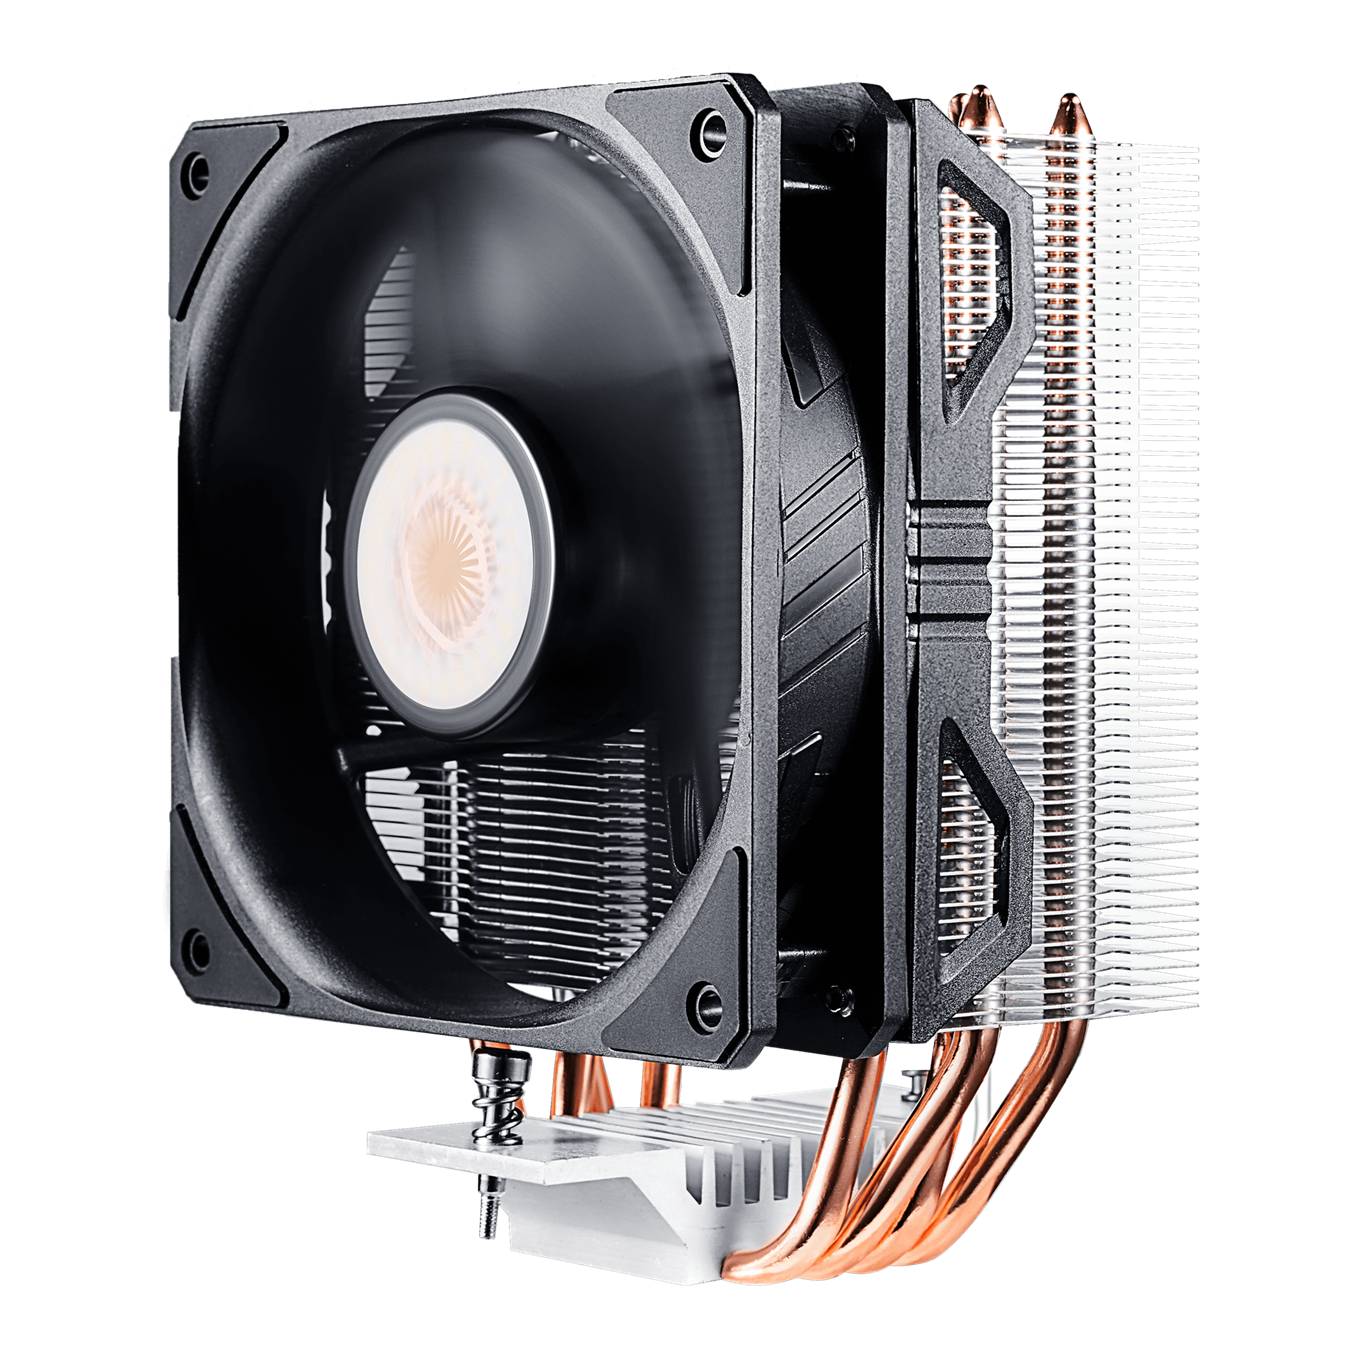 Hyper 212 EVO V2 - Low vibrations and quiet fan allows for nearly inaudible levels